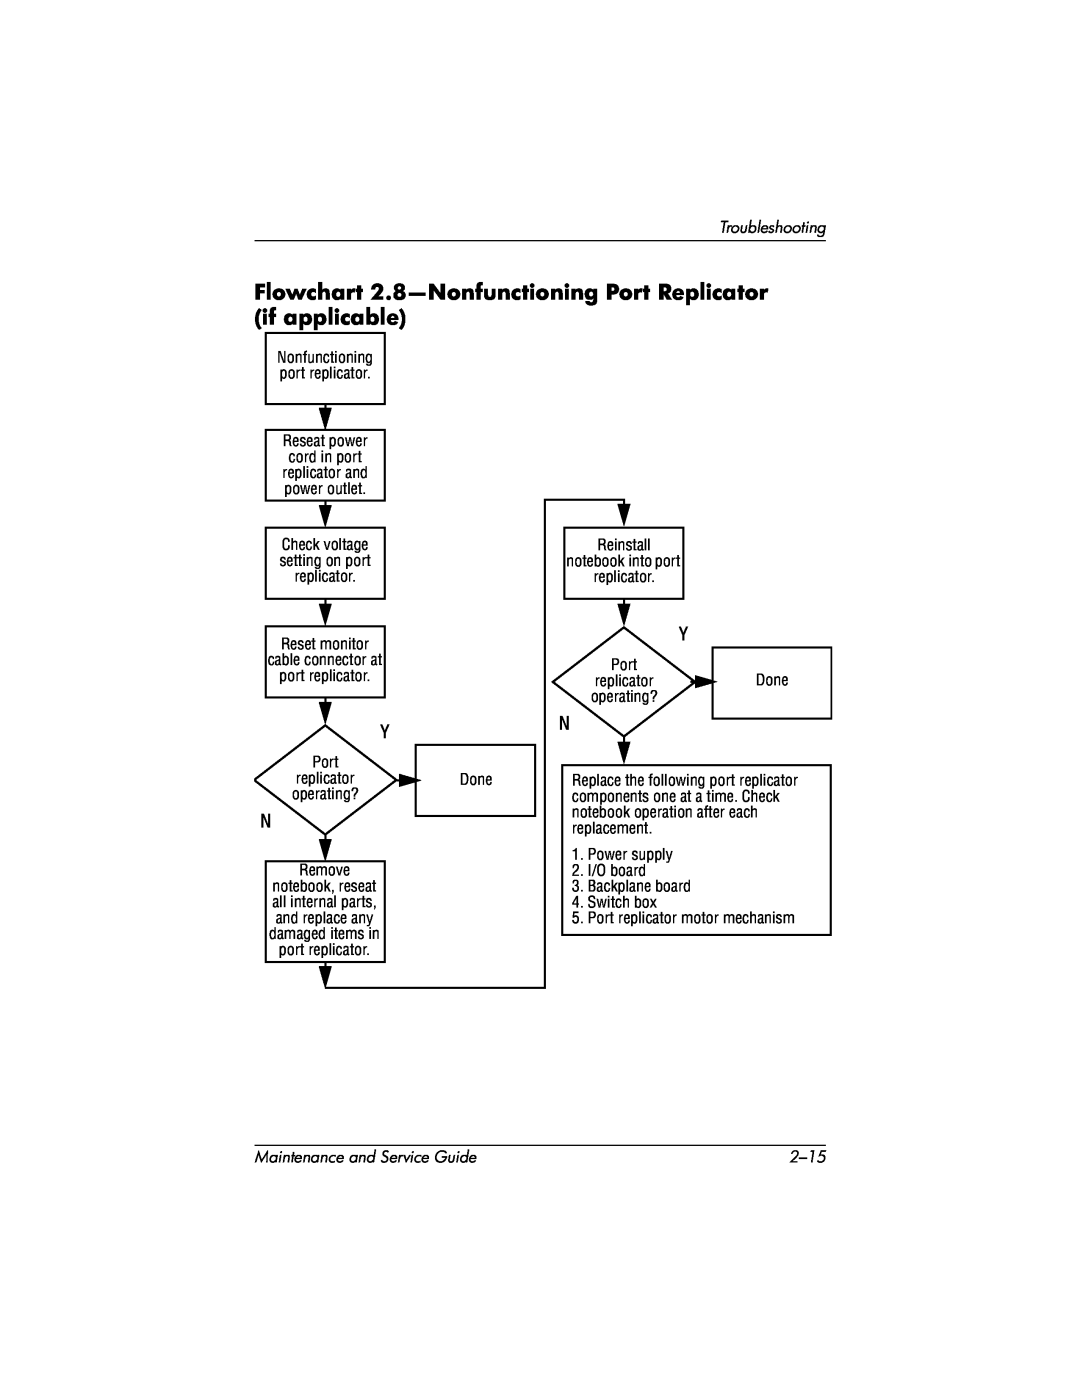 HP X1230US Flowchart 2.8-Nonfunctioning Port Replicator if applicable, Troubleshooting, Maintenance and Service Guide 